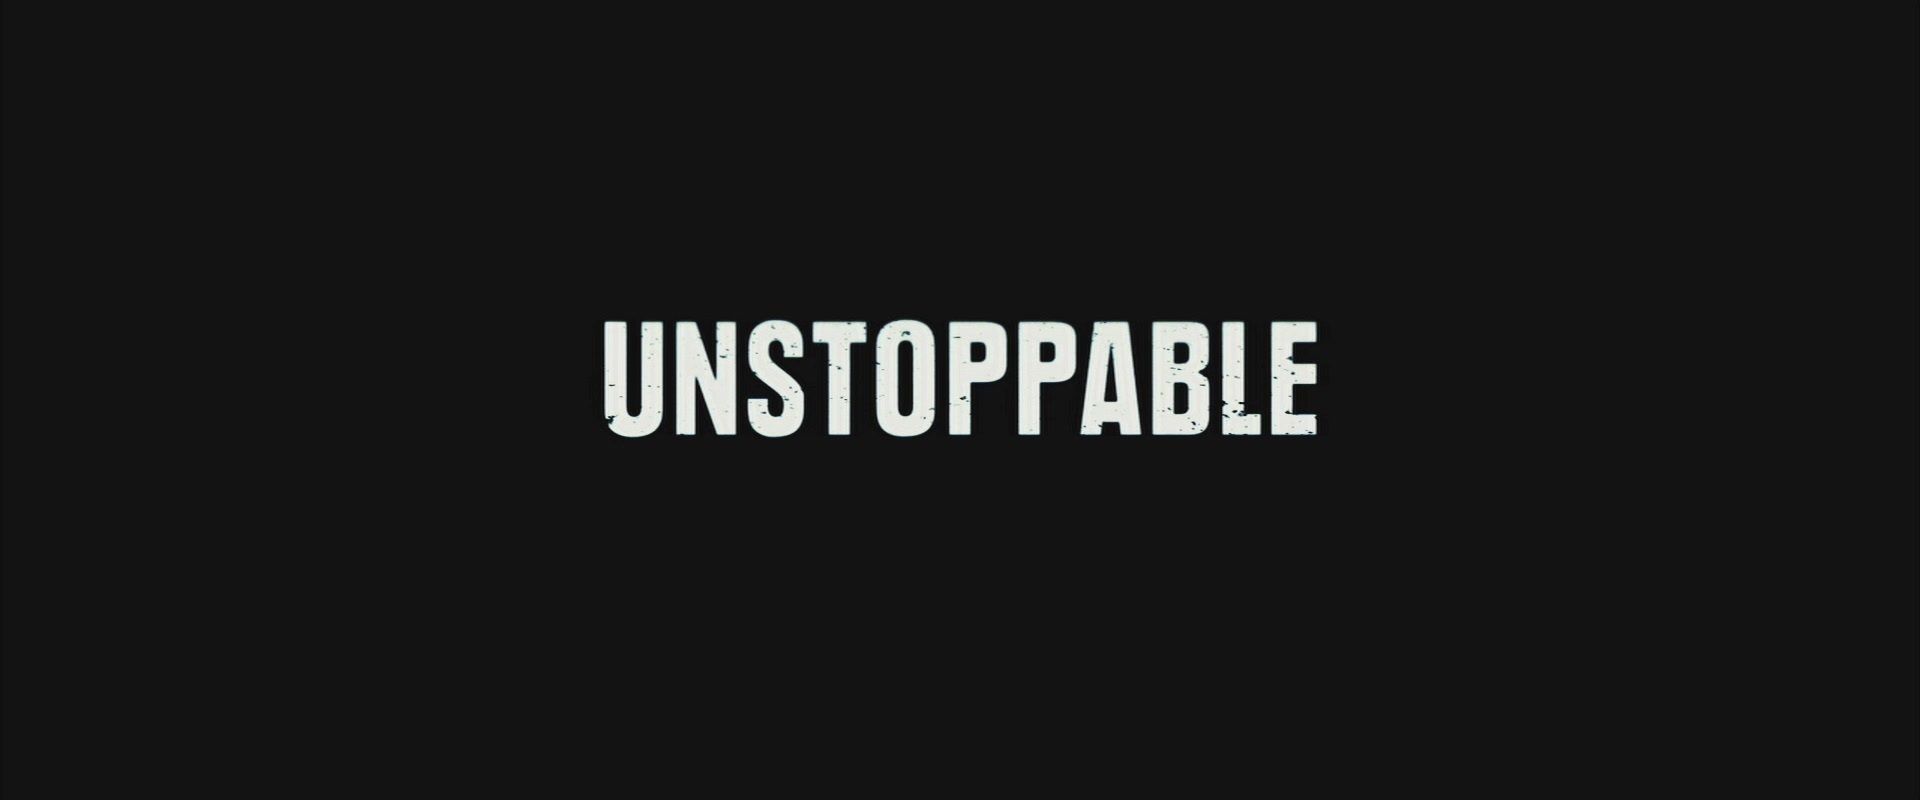 unstoppable hd movie download in tamilrockers